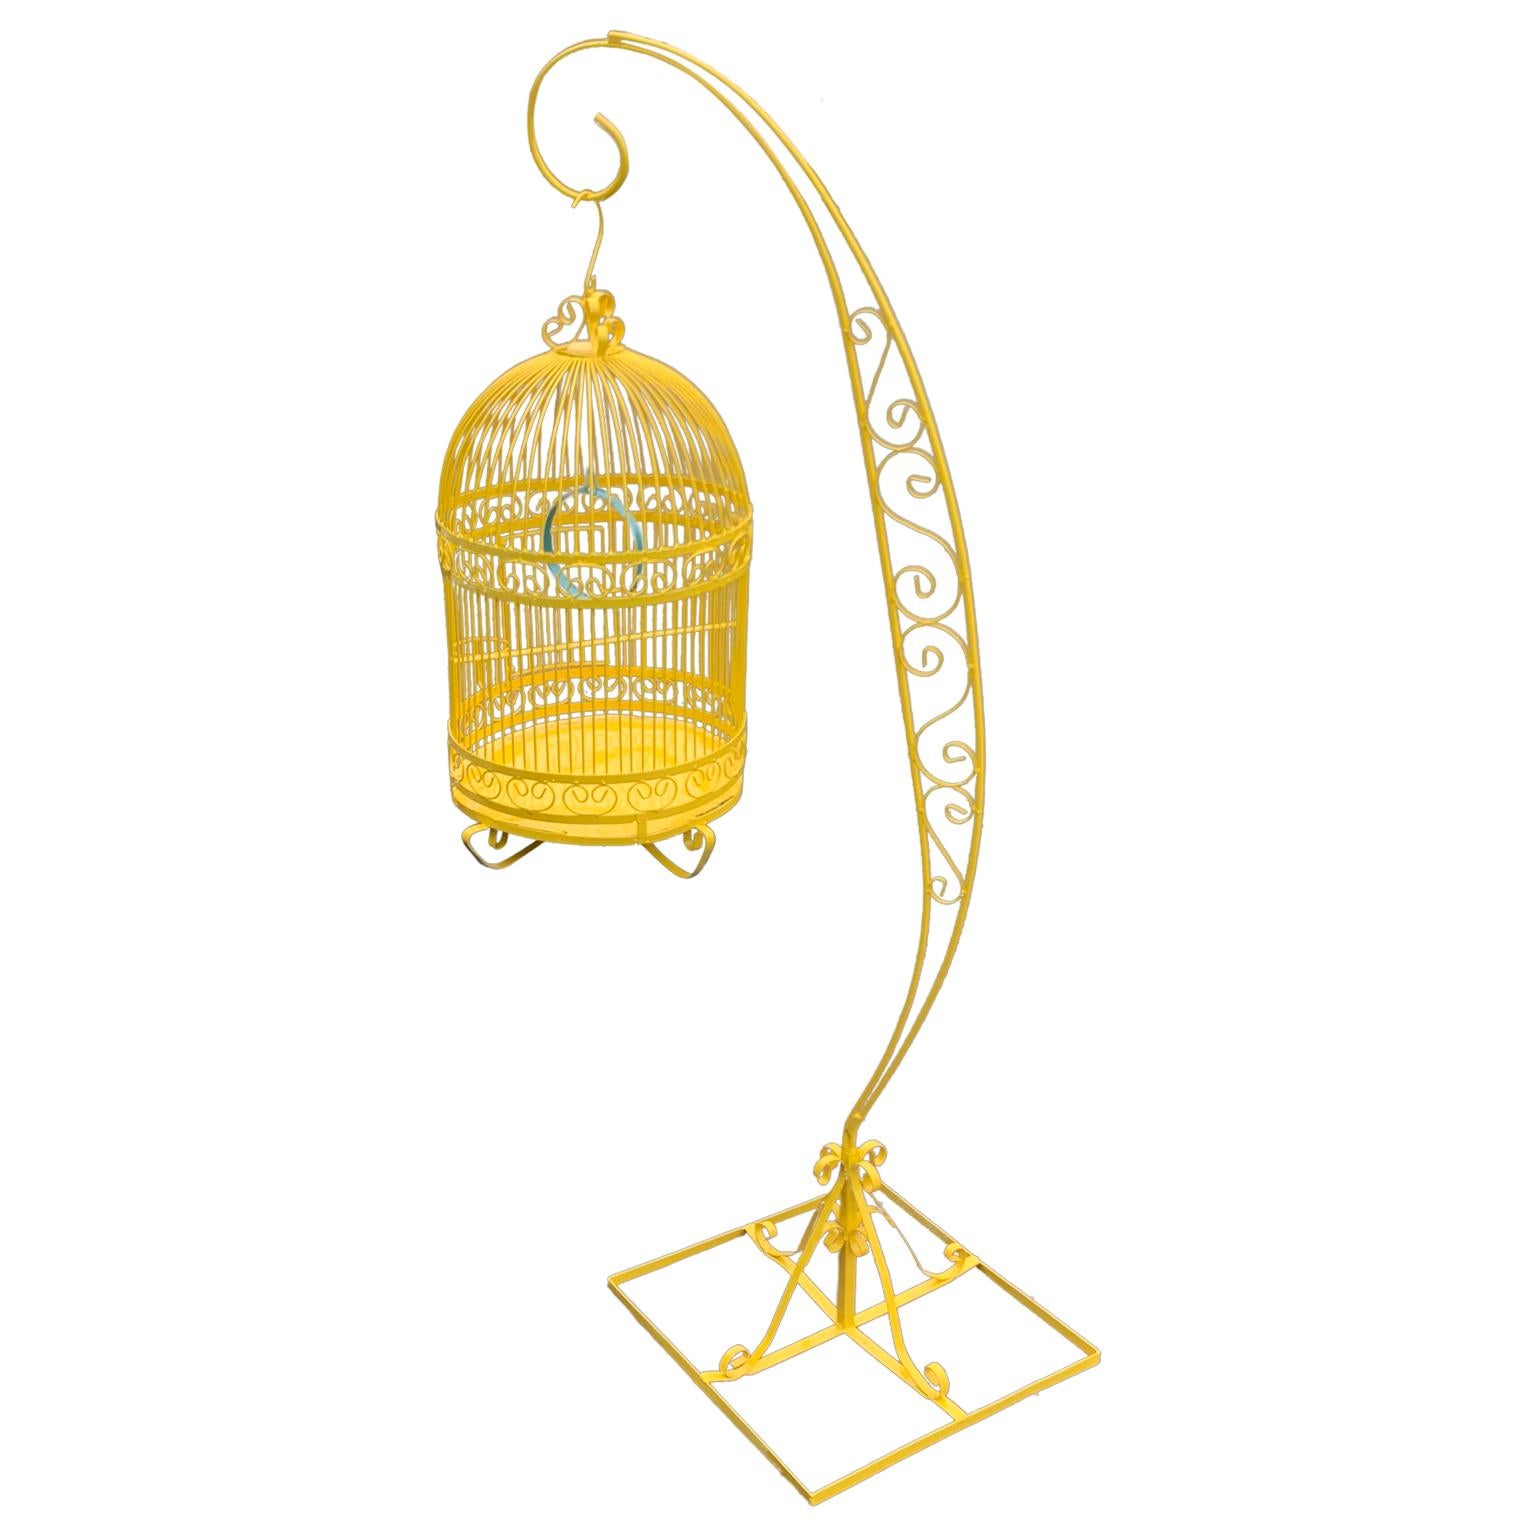 Vintage Metal Birdcage on Stand, Newly Powder-Coated in Bright Sunshine Yellow